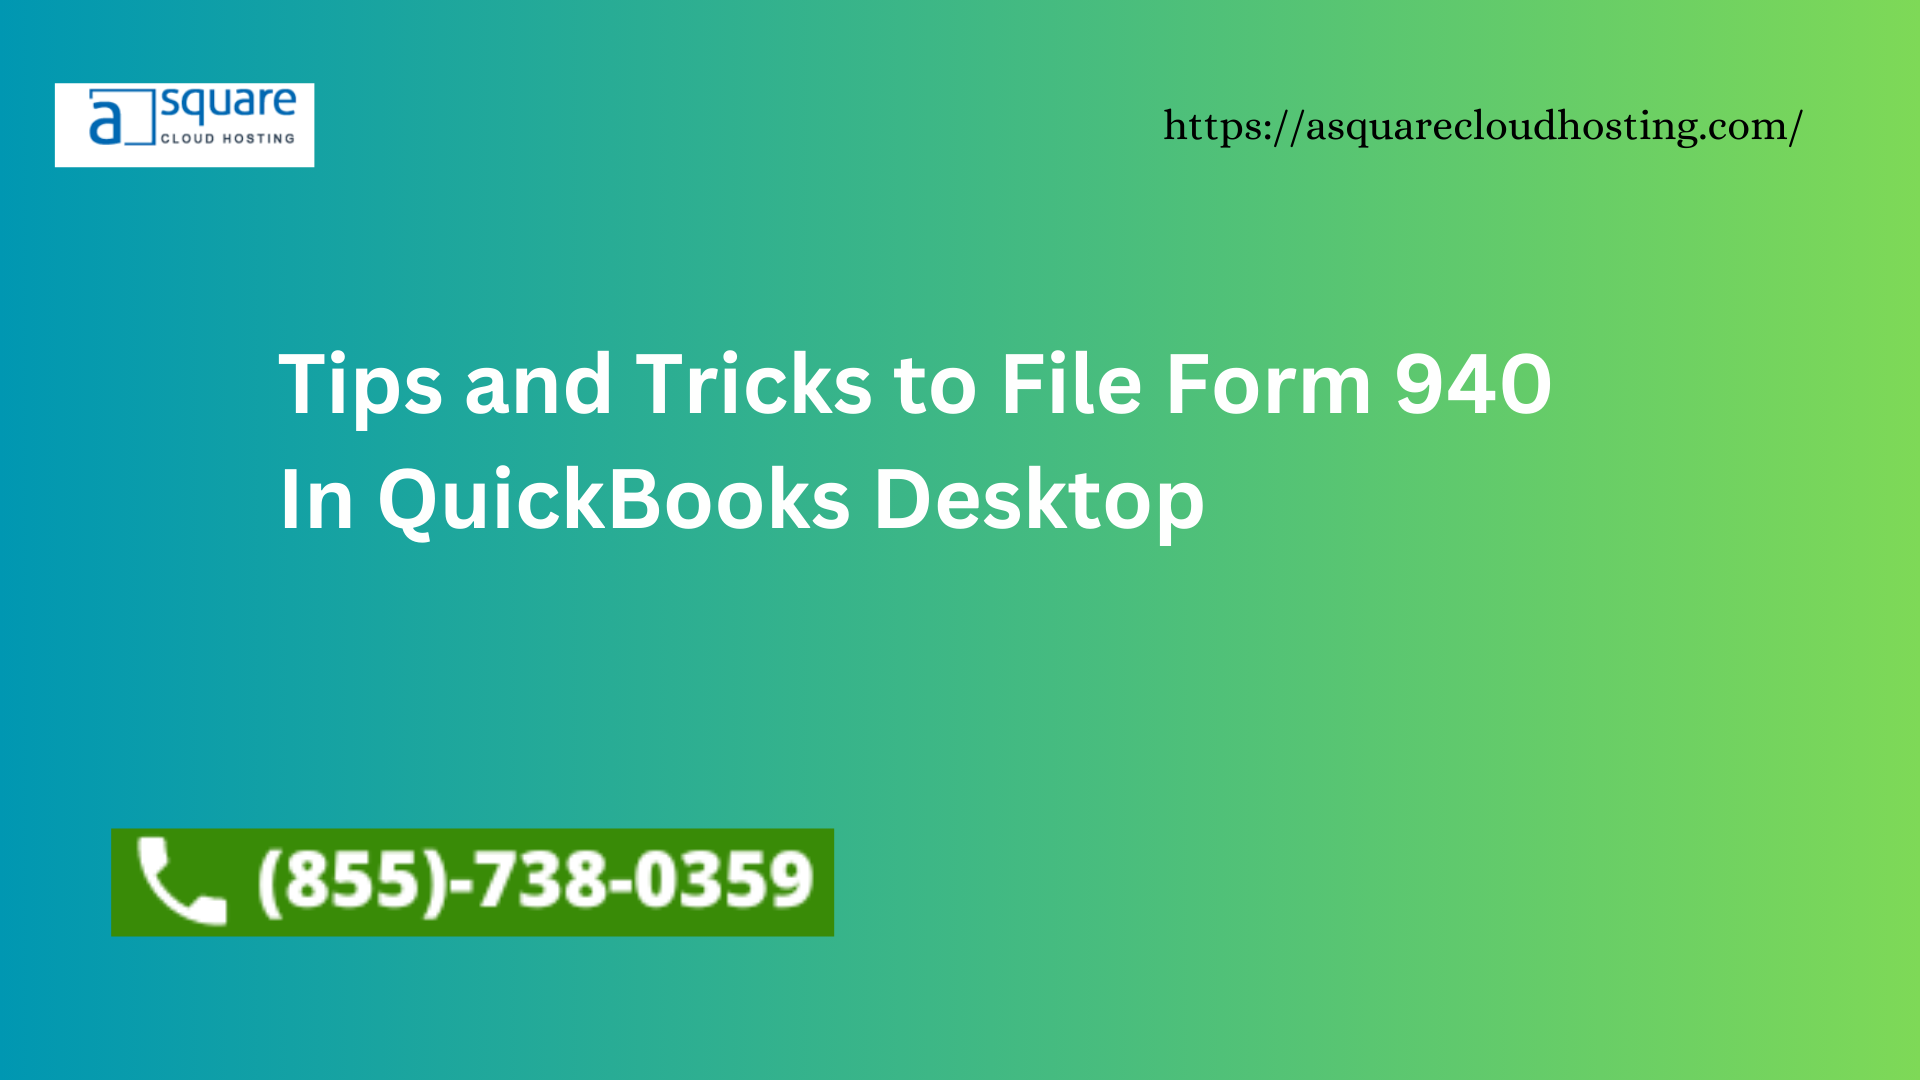 Tips and Tricks to File Form 940 In QuickBooks Desktop